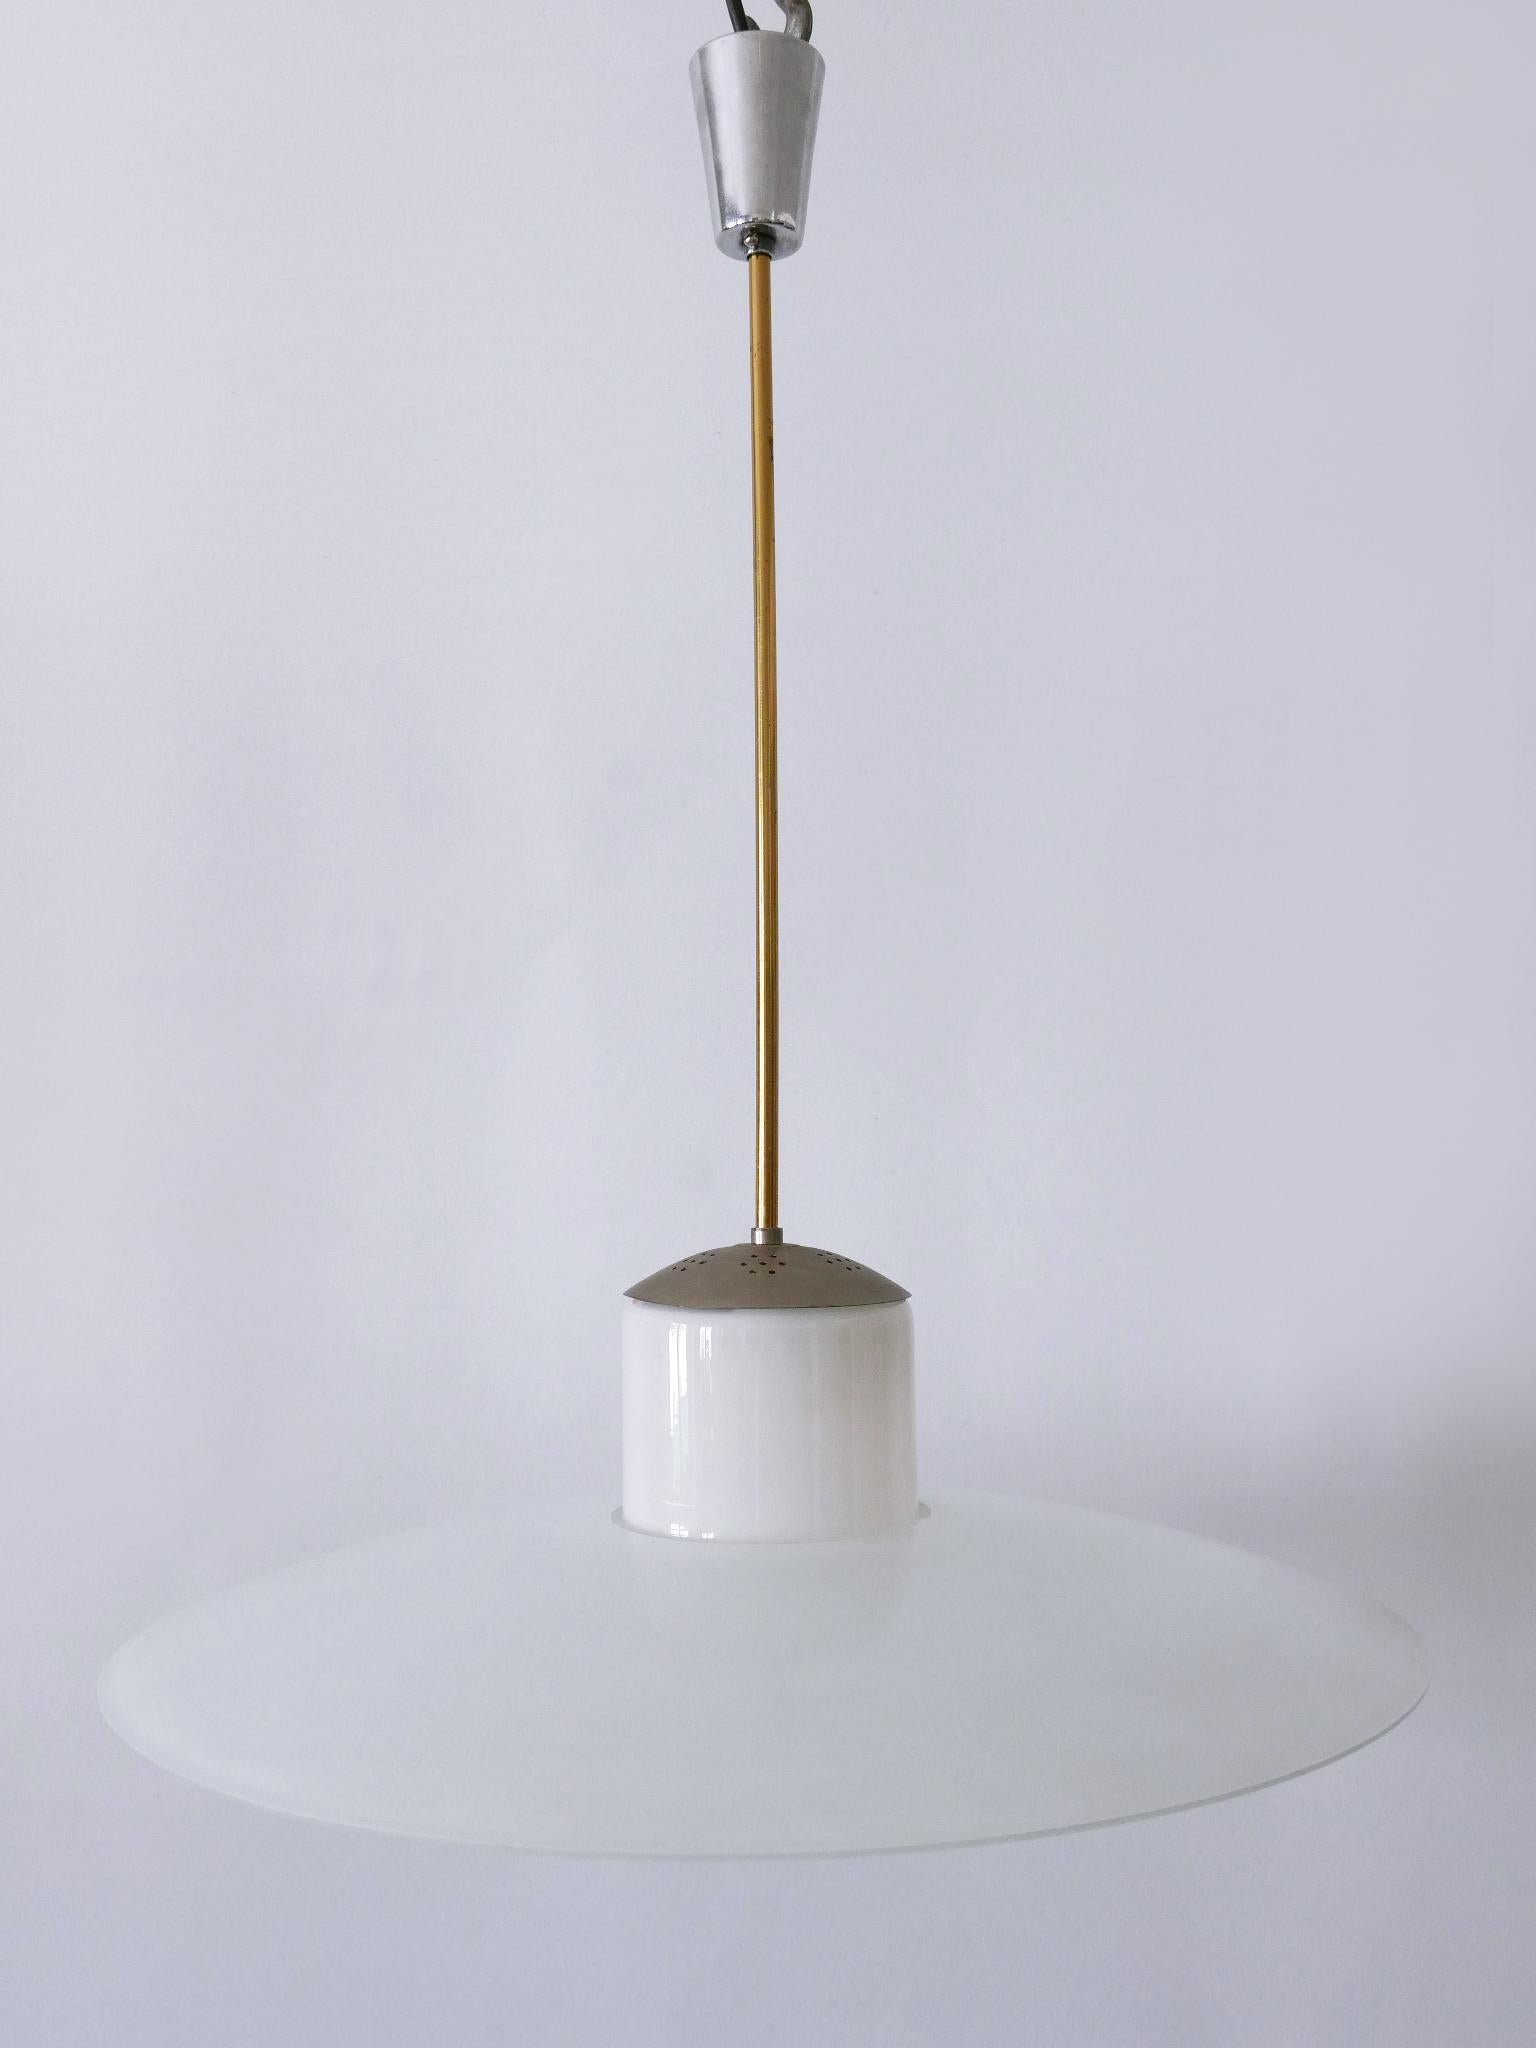 Rare Mid-Century Modern Pendant Lamp by Wolfgang Tümpel for Doria Germany 1950s For Sale 12